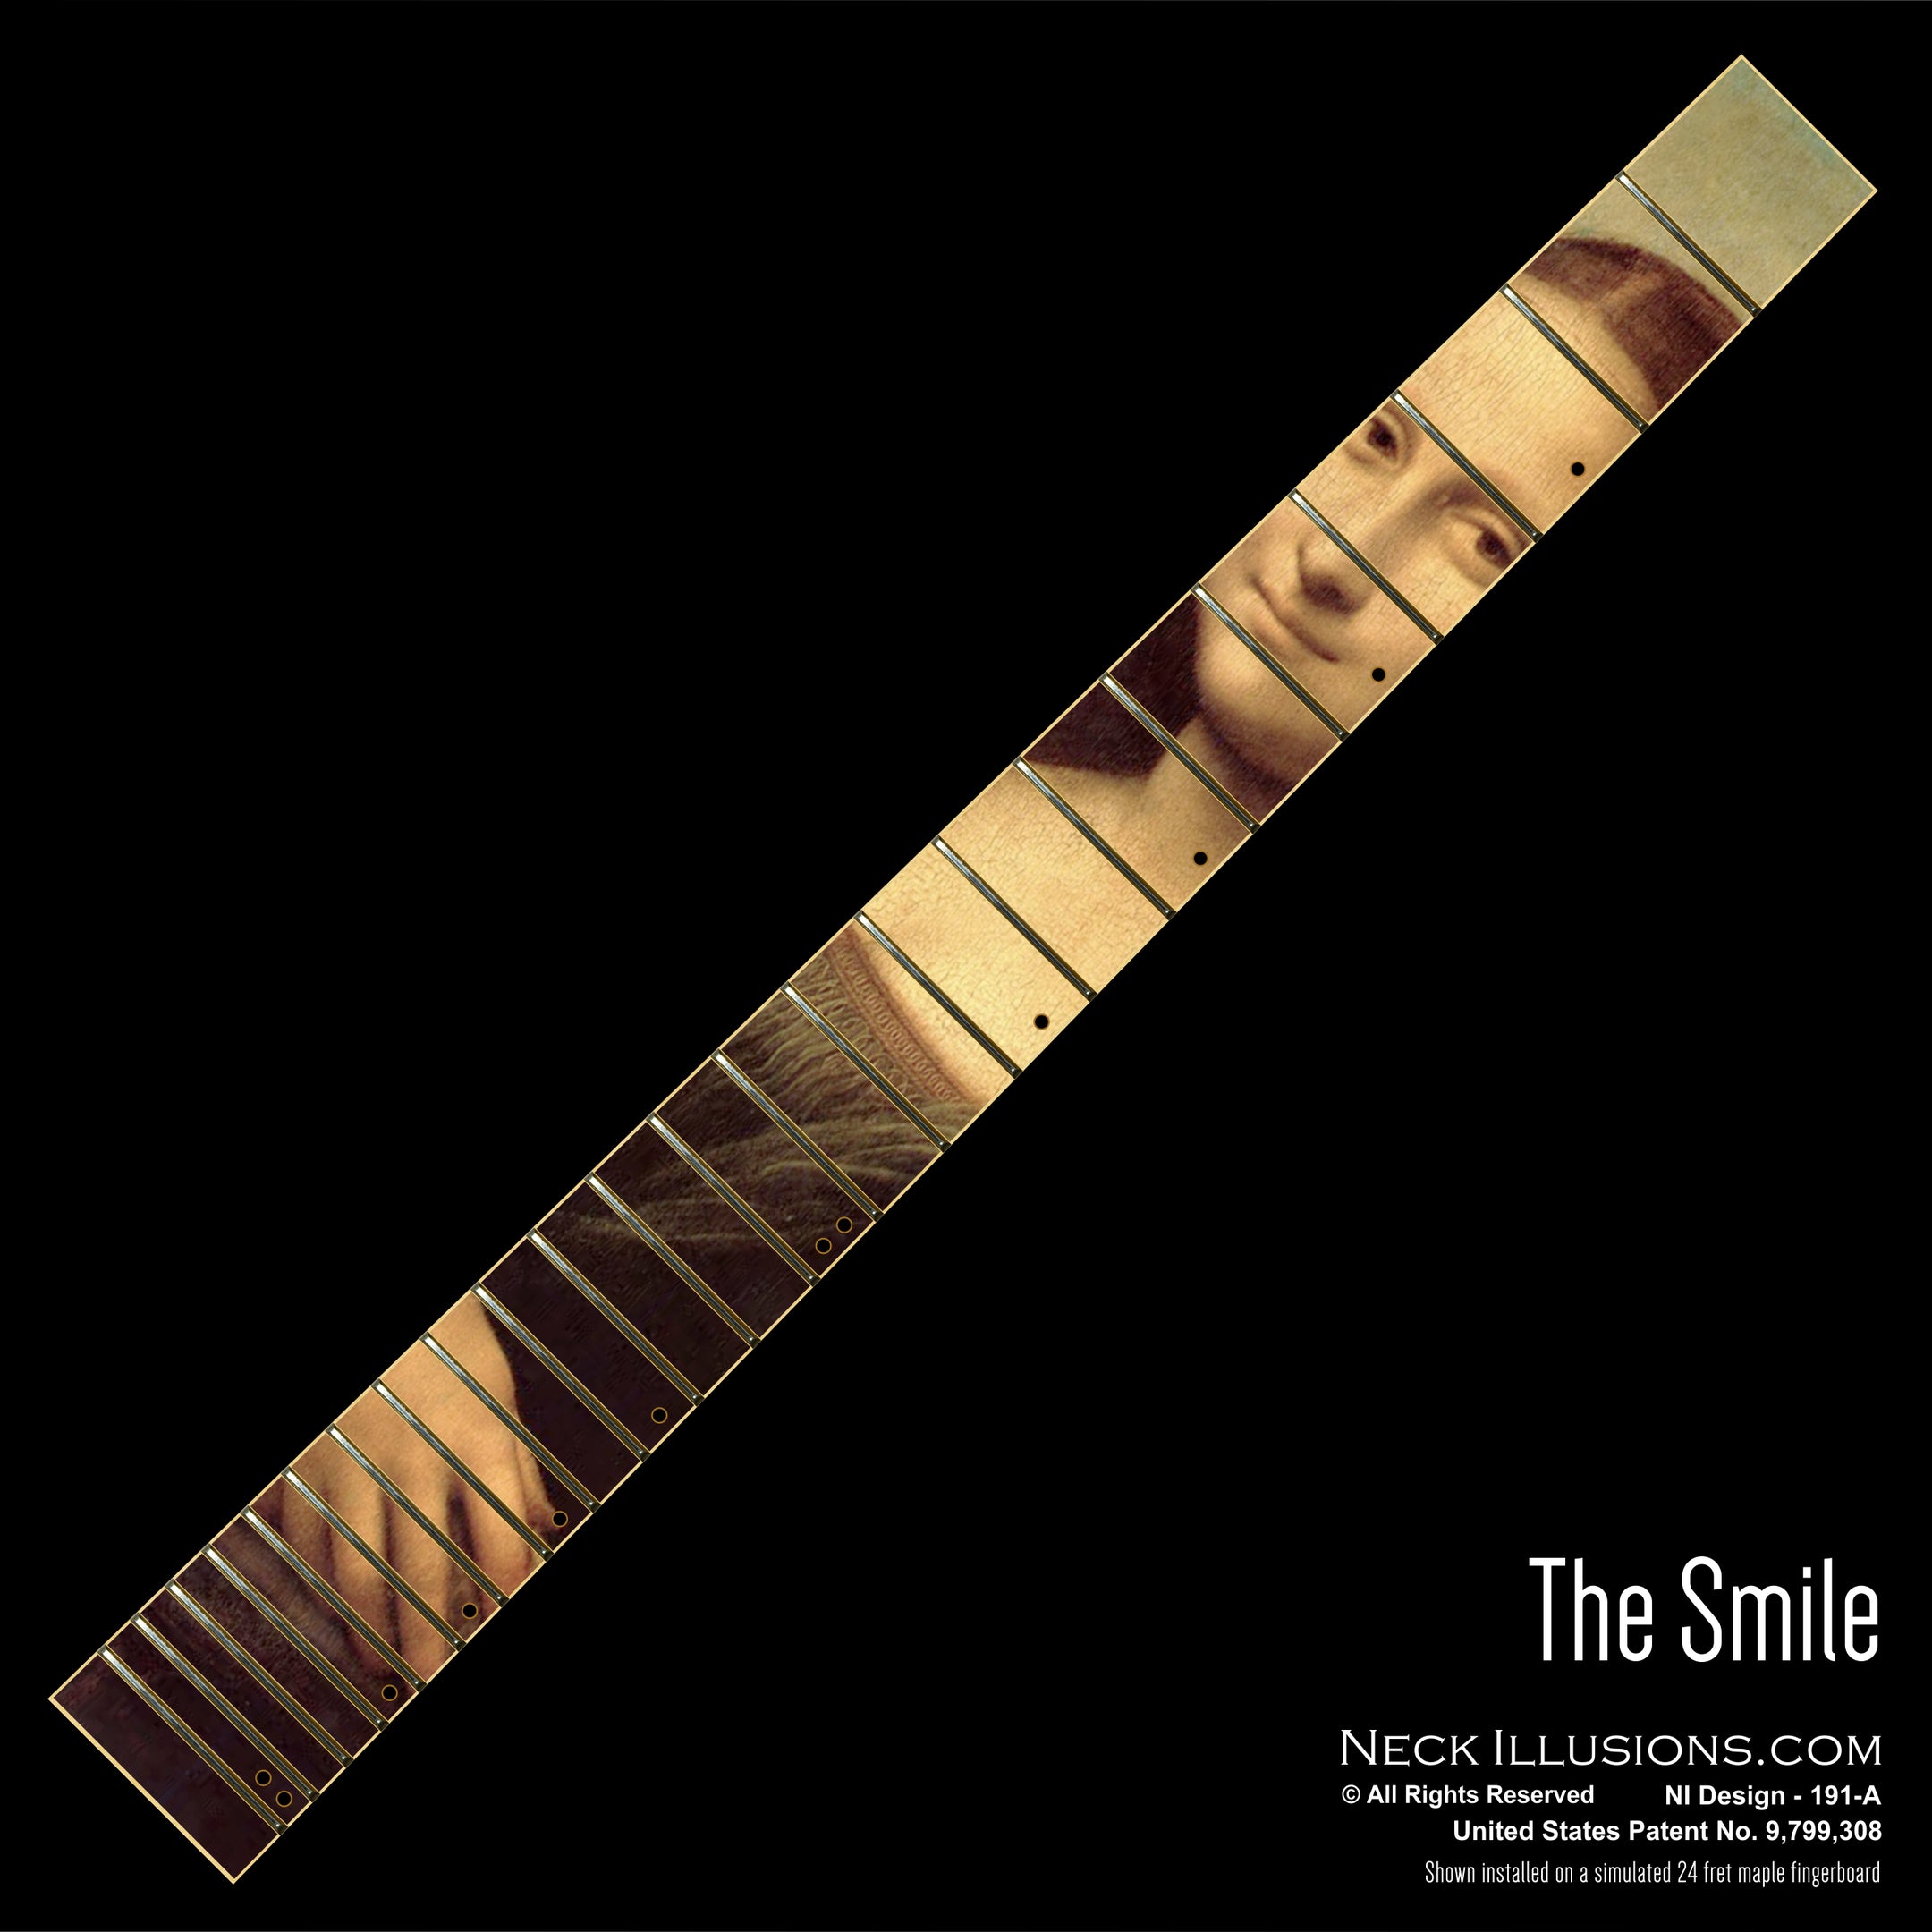 The Smile